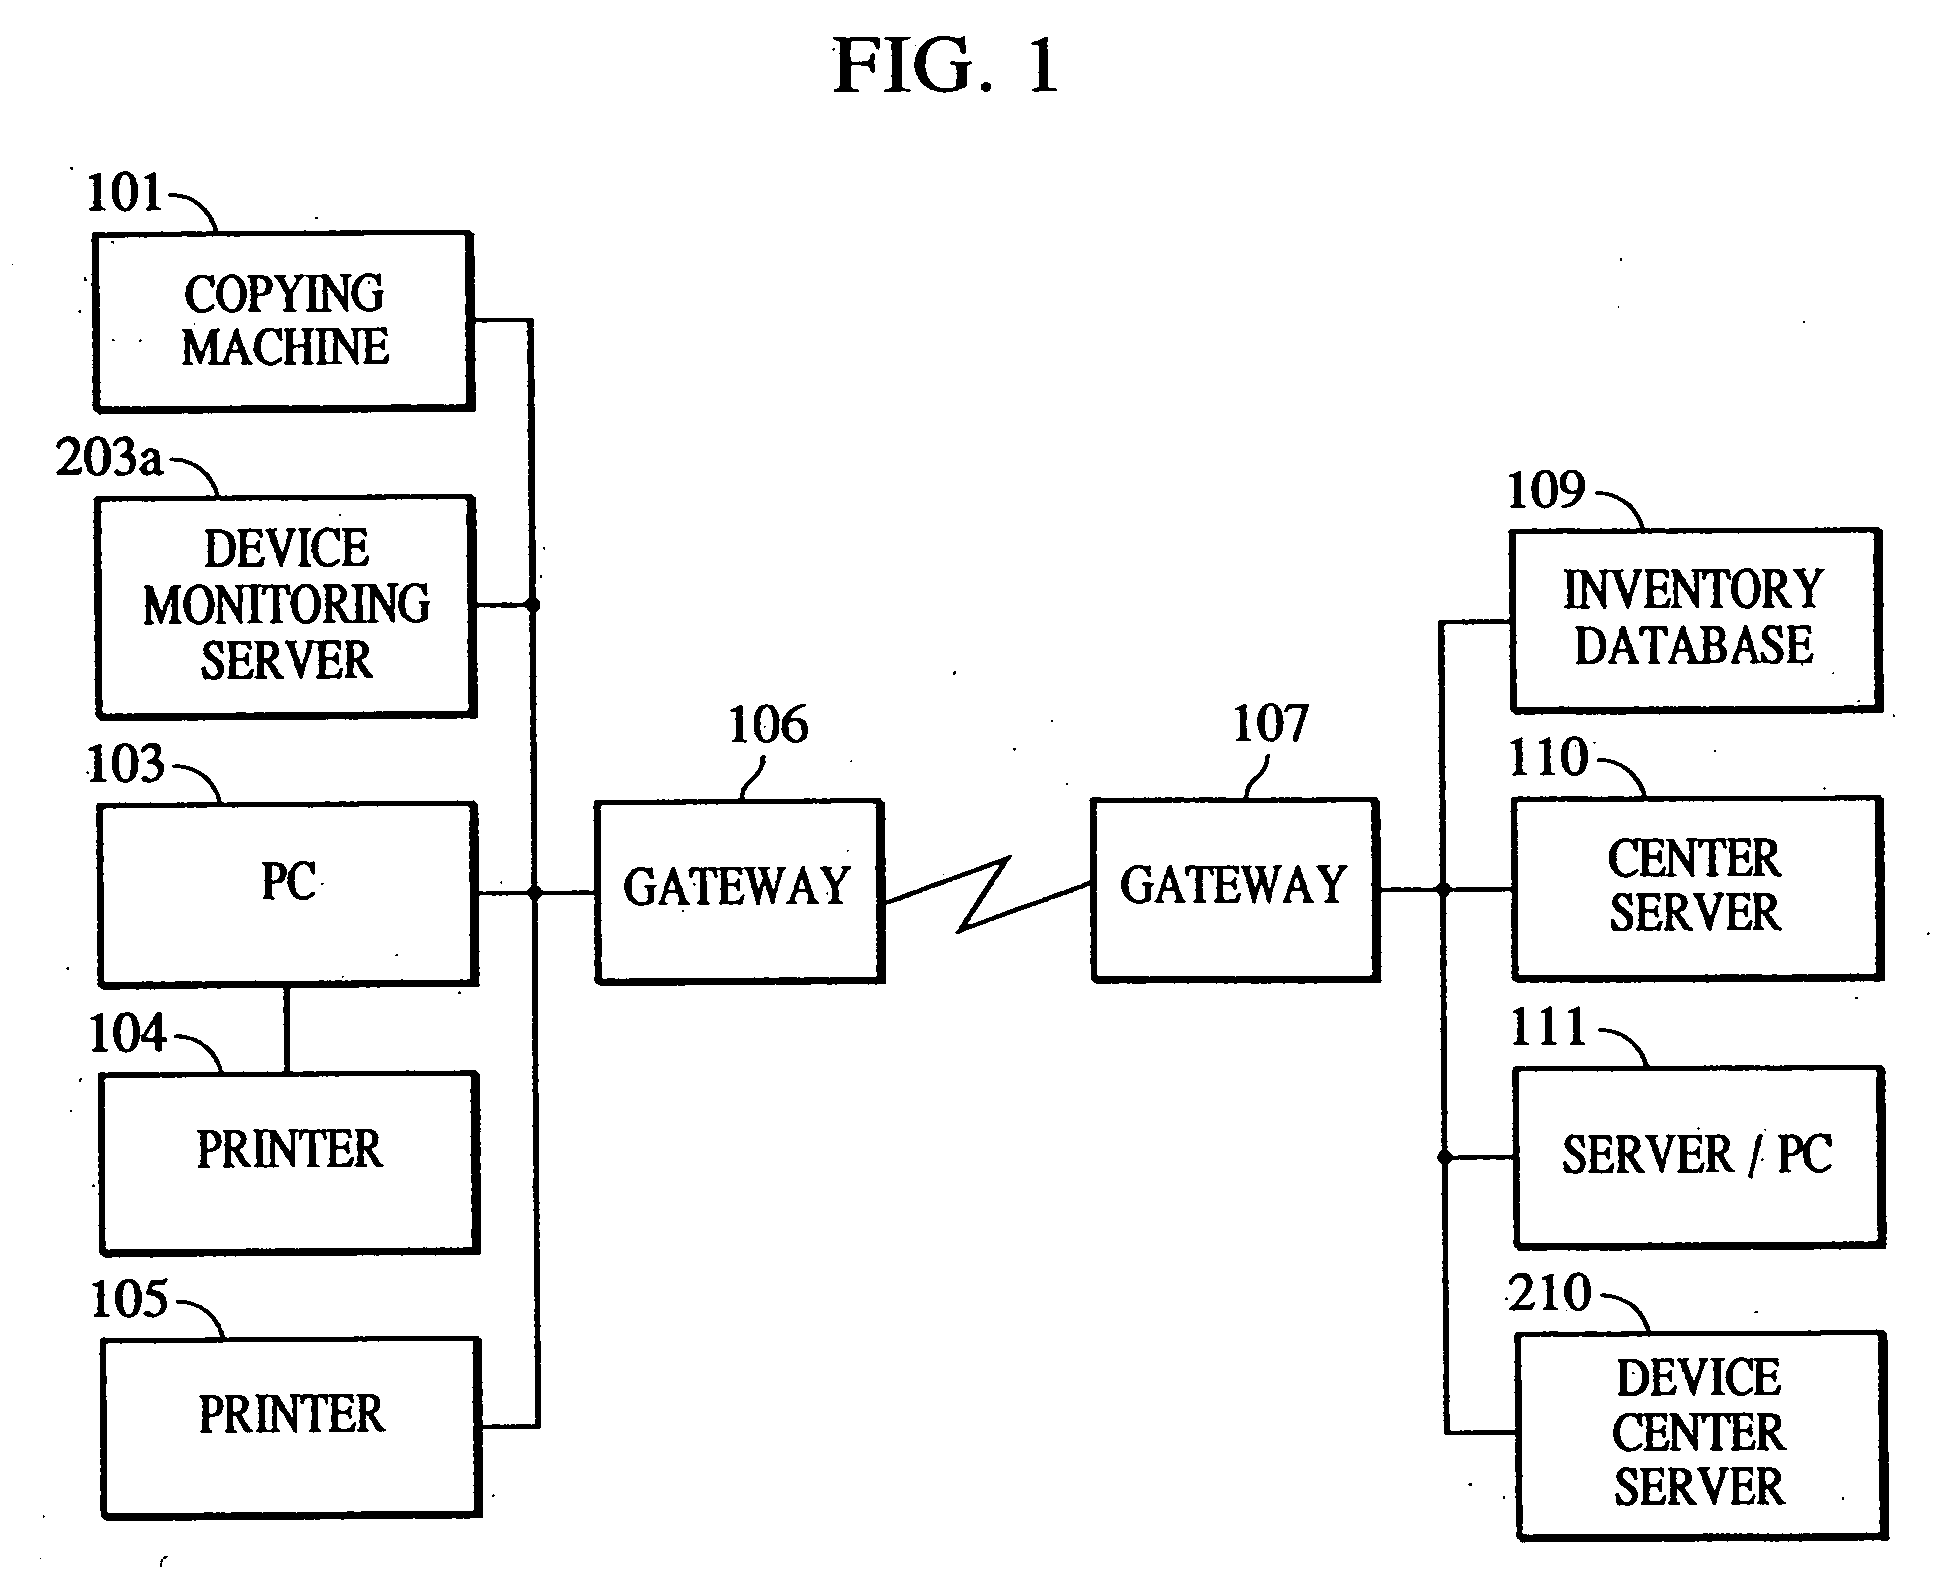 Apparatus for managing a device, program for managing a device, storage medium on which a program for managing a device is stored, and method of managing a device